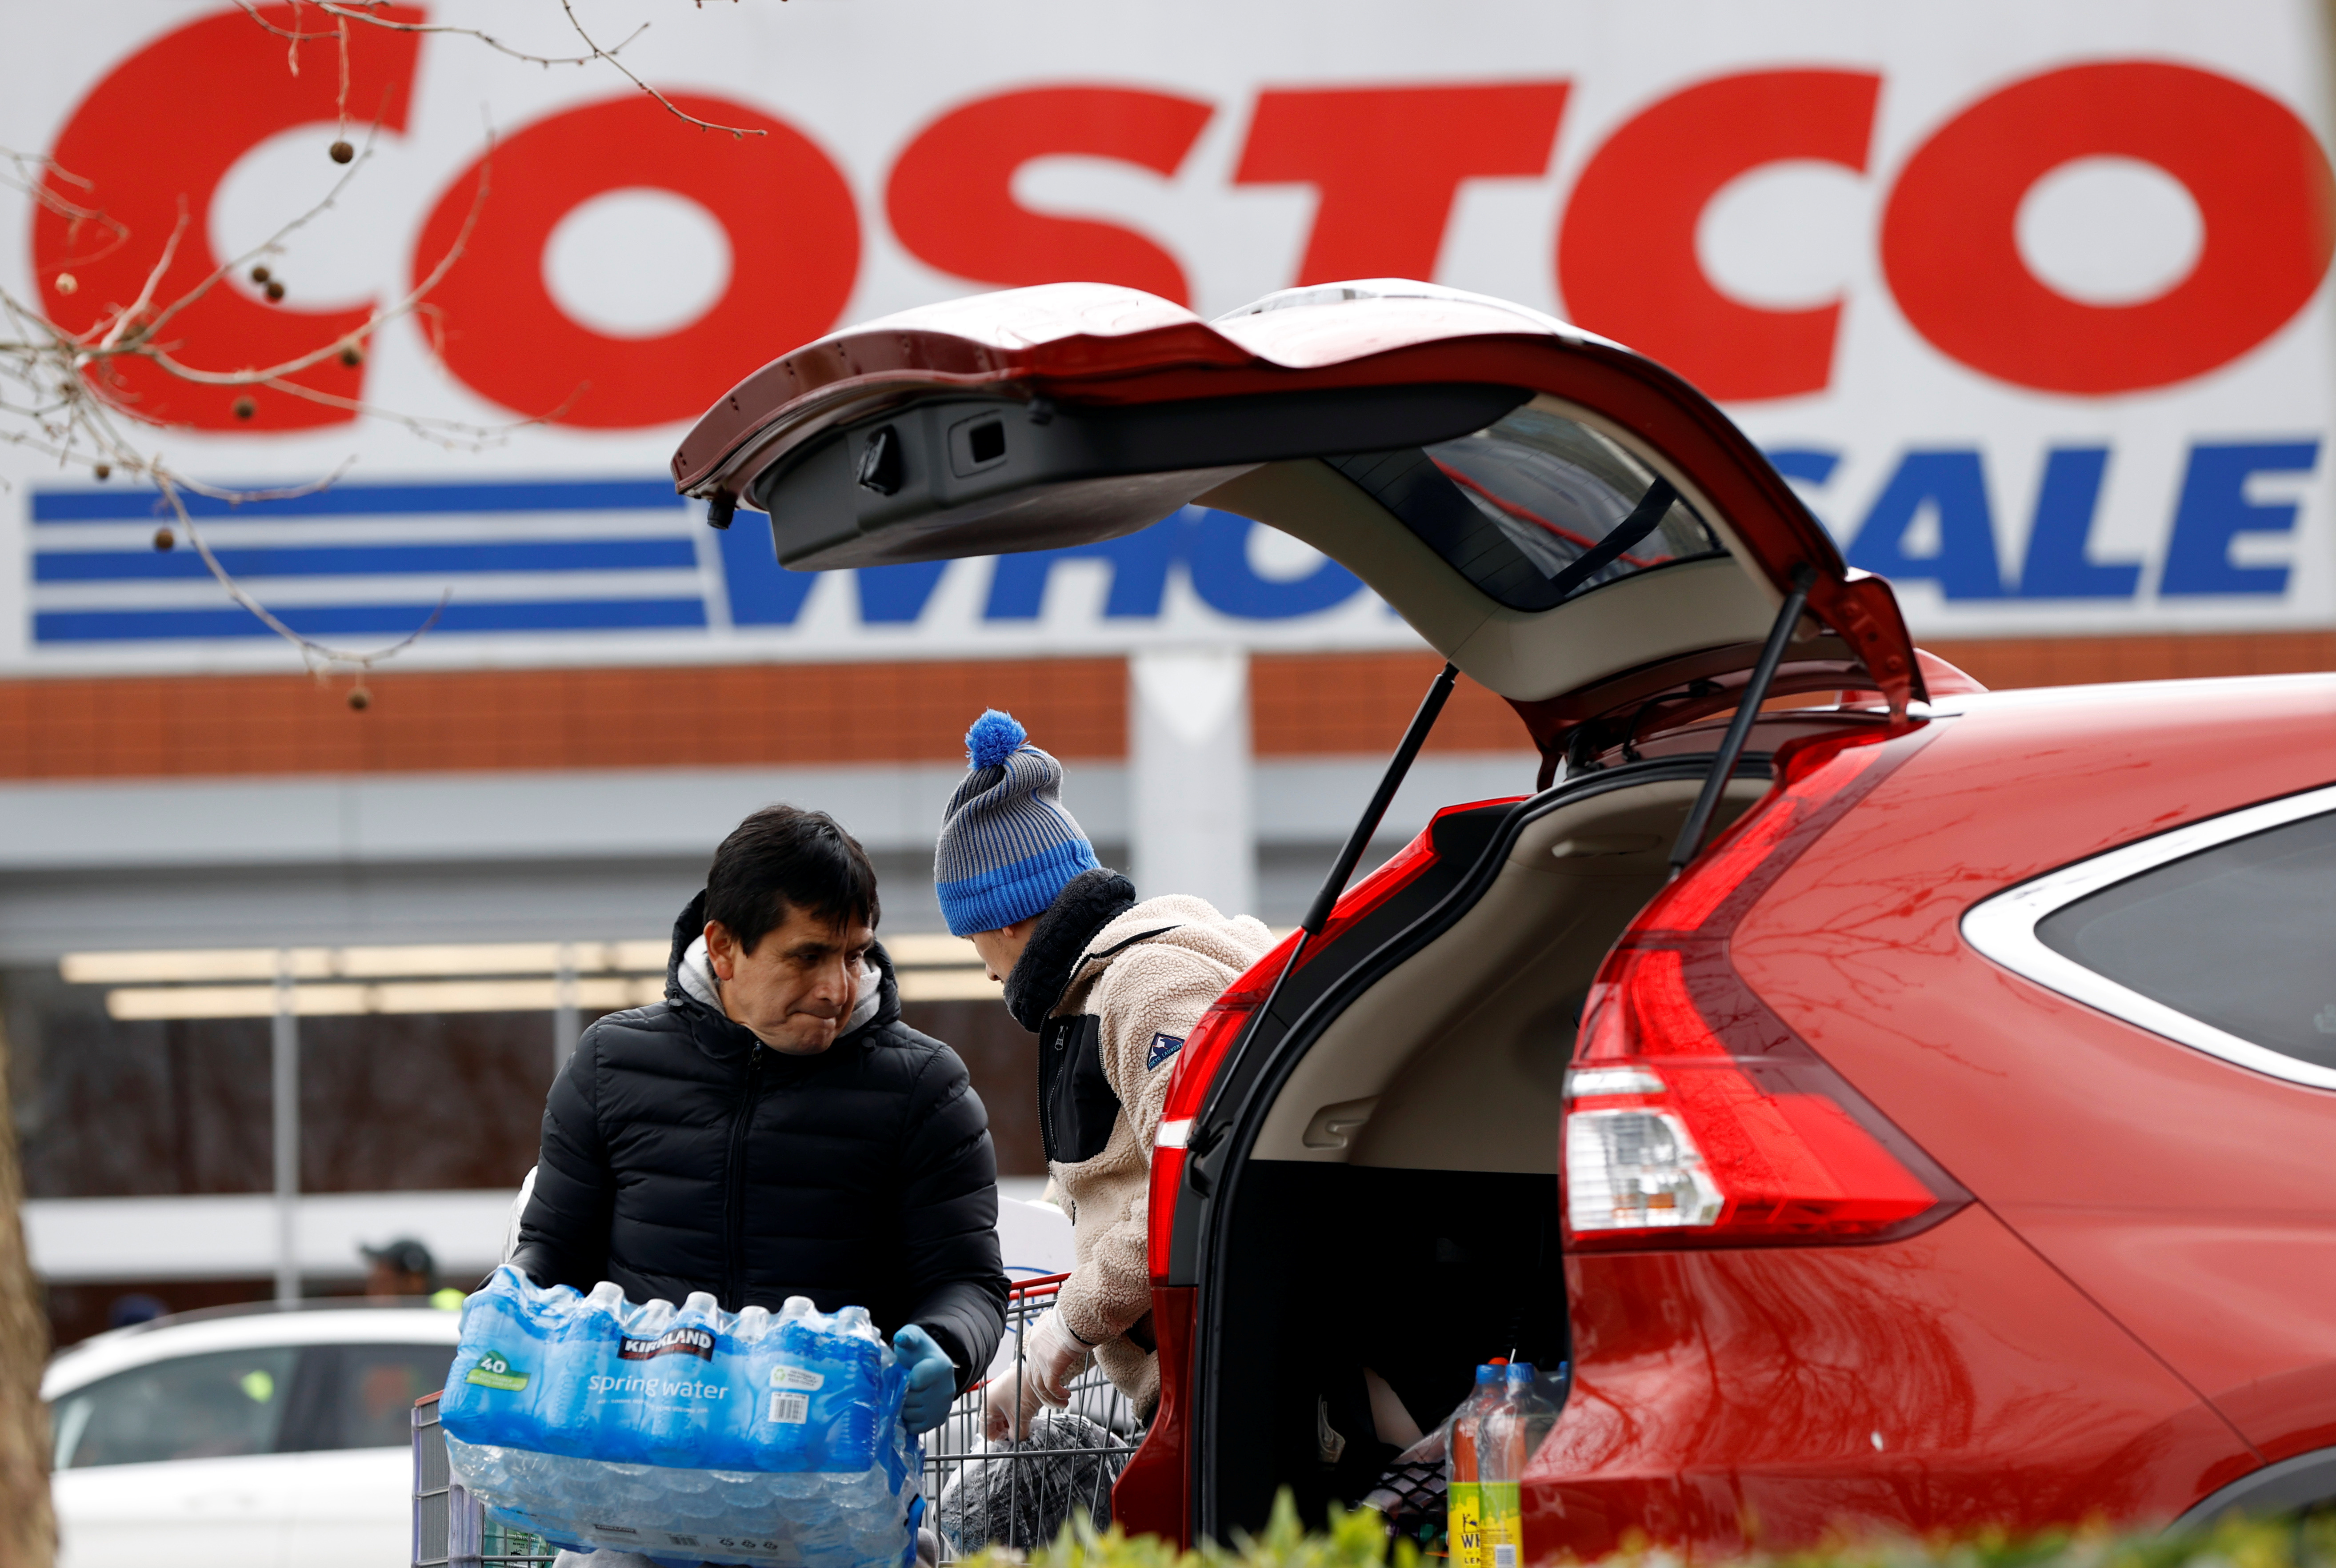 Costco posts upbeat first-quarter results on strong demand for cheaper  groceries